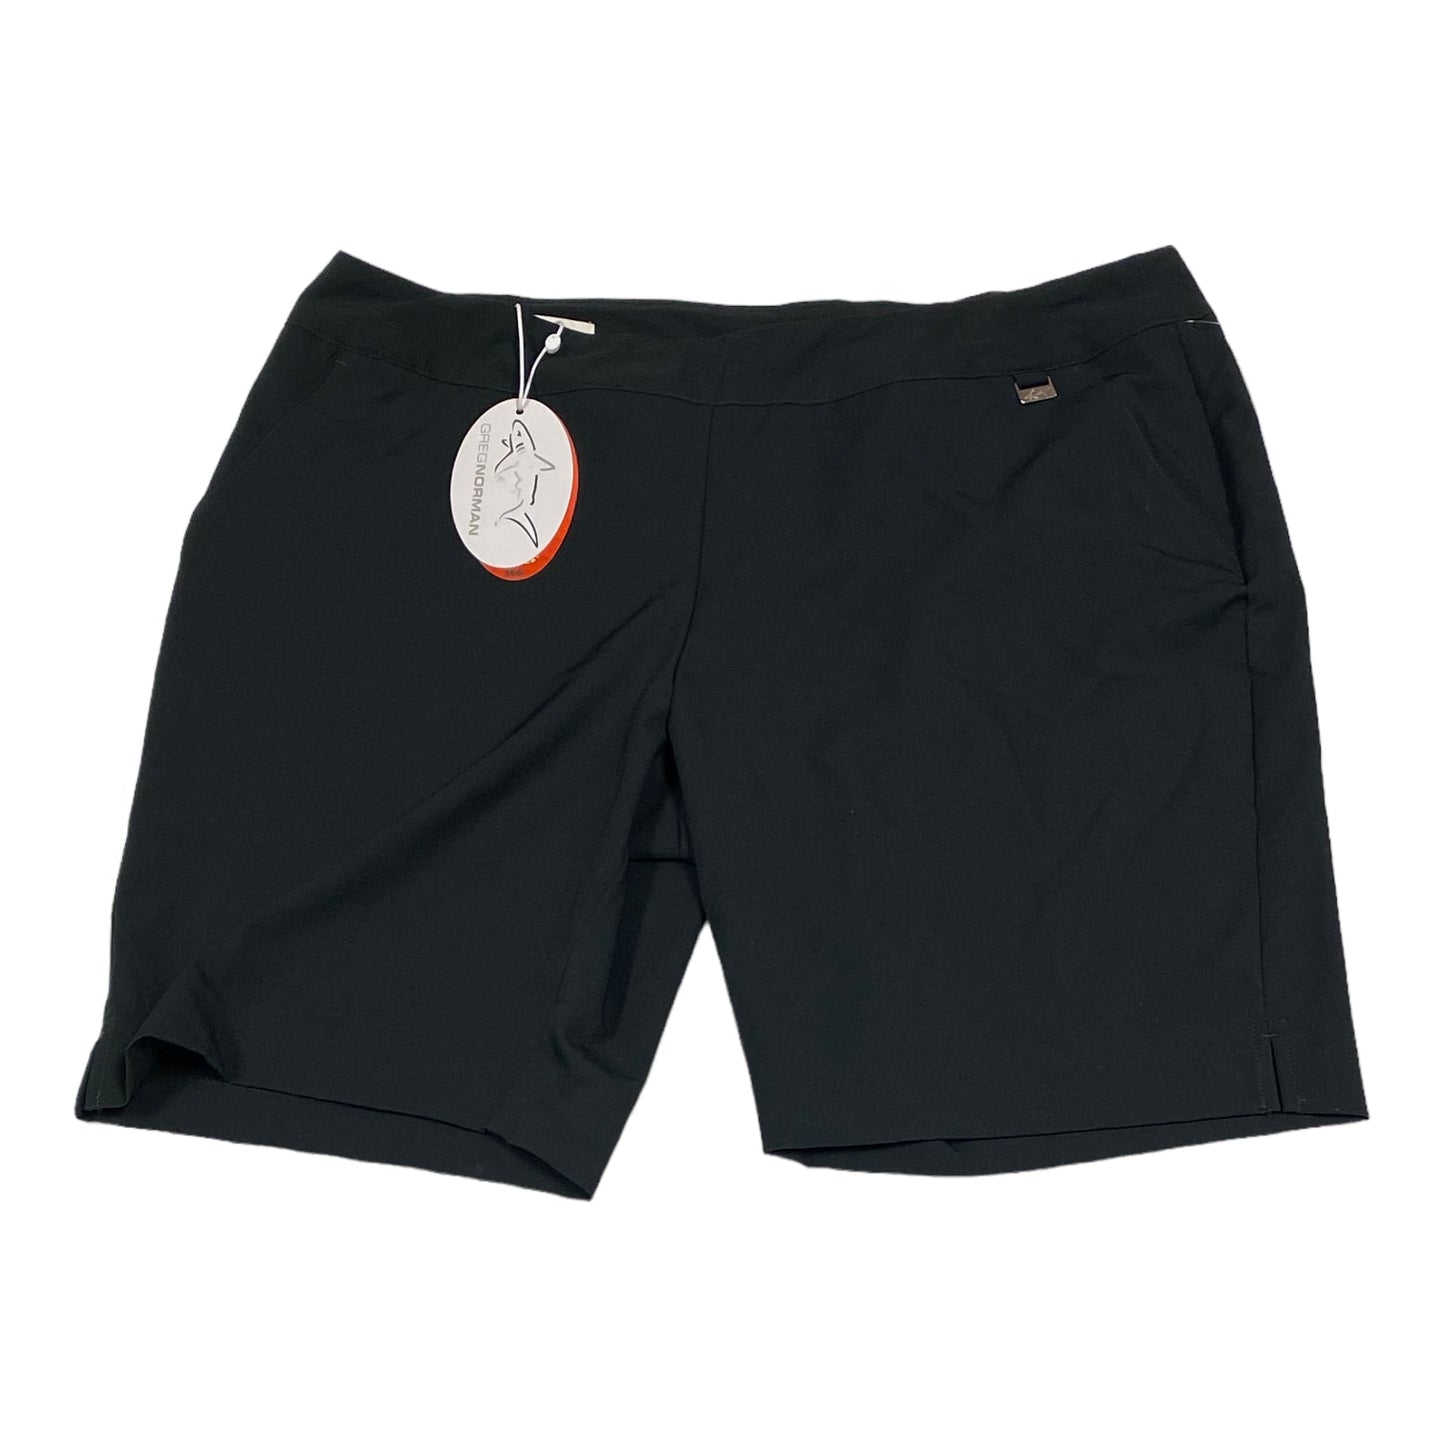 Athletic Shorts By Cmc  Size: 14